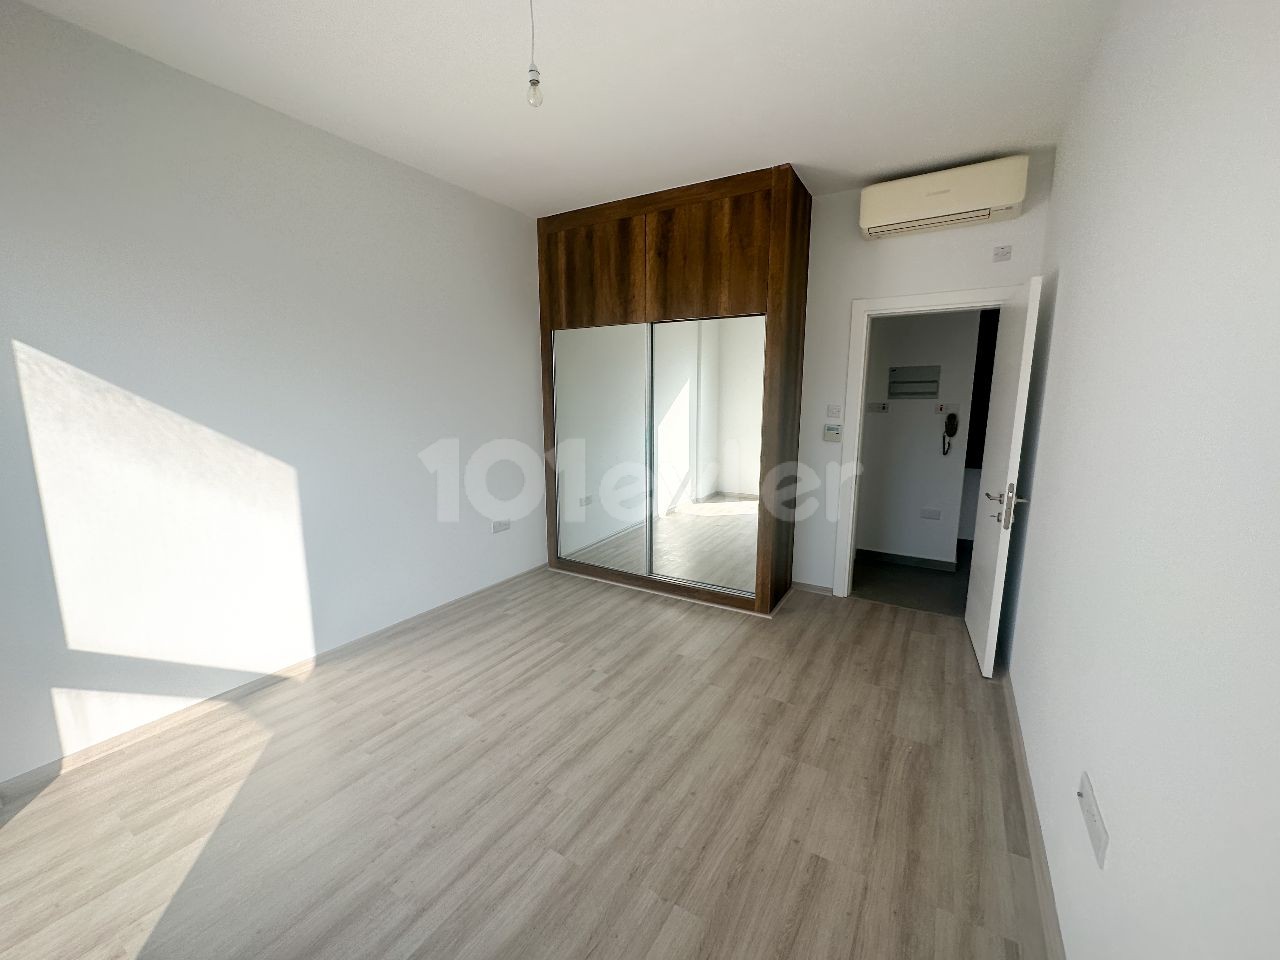 2+1 Flat for Sale in Caddemm, Famagusta. VAT and Transformer Paid